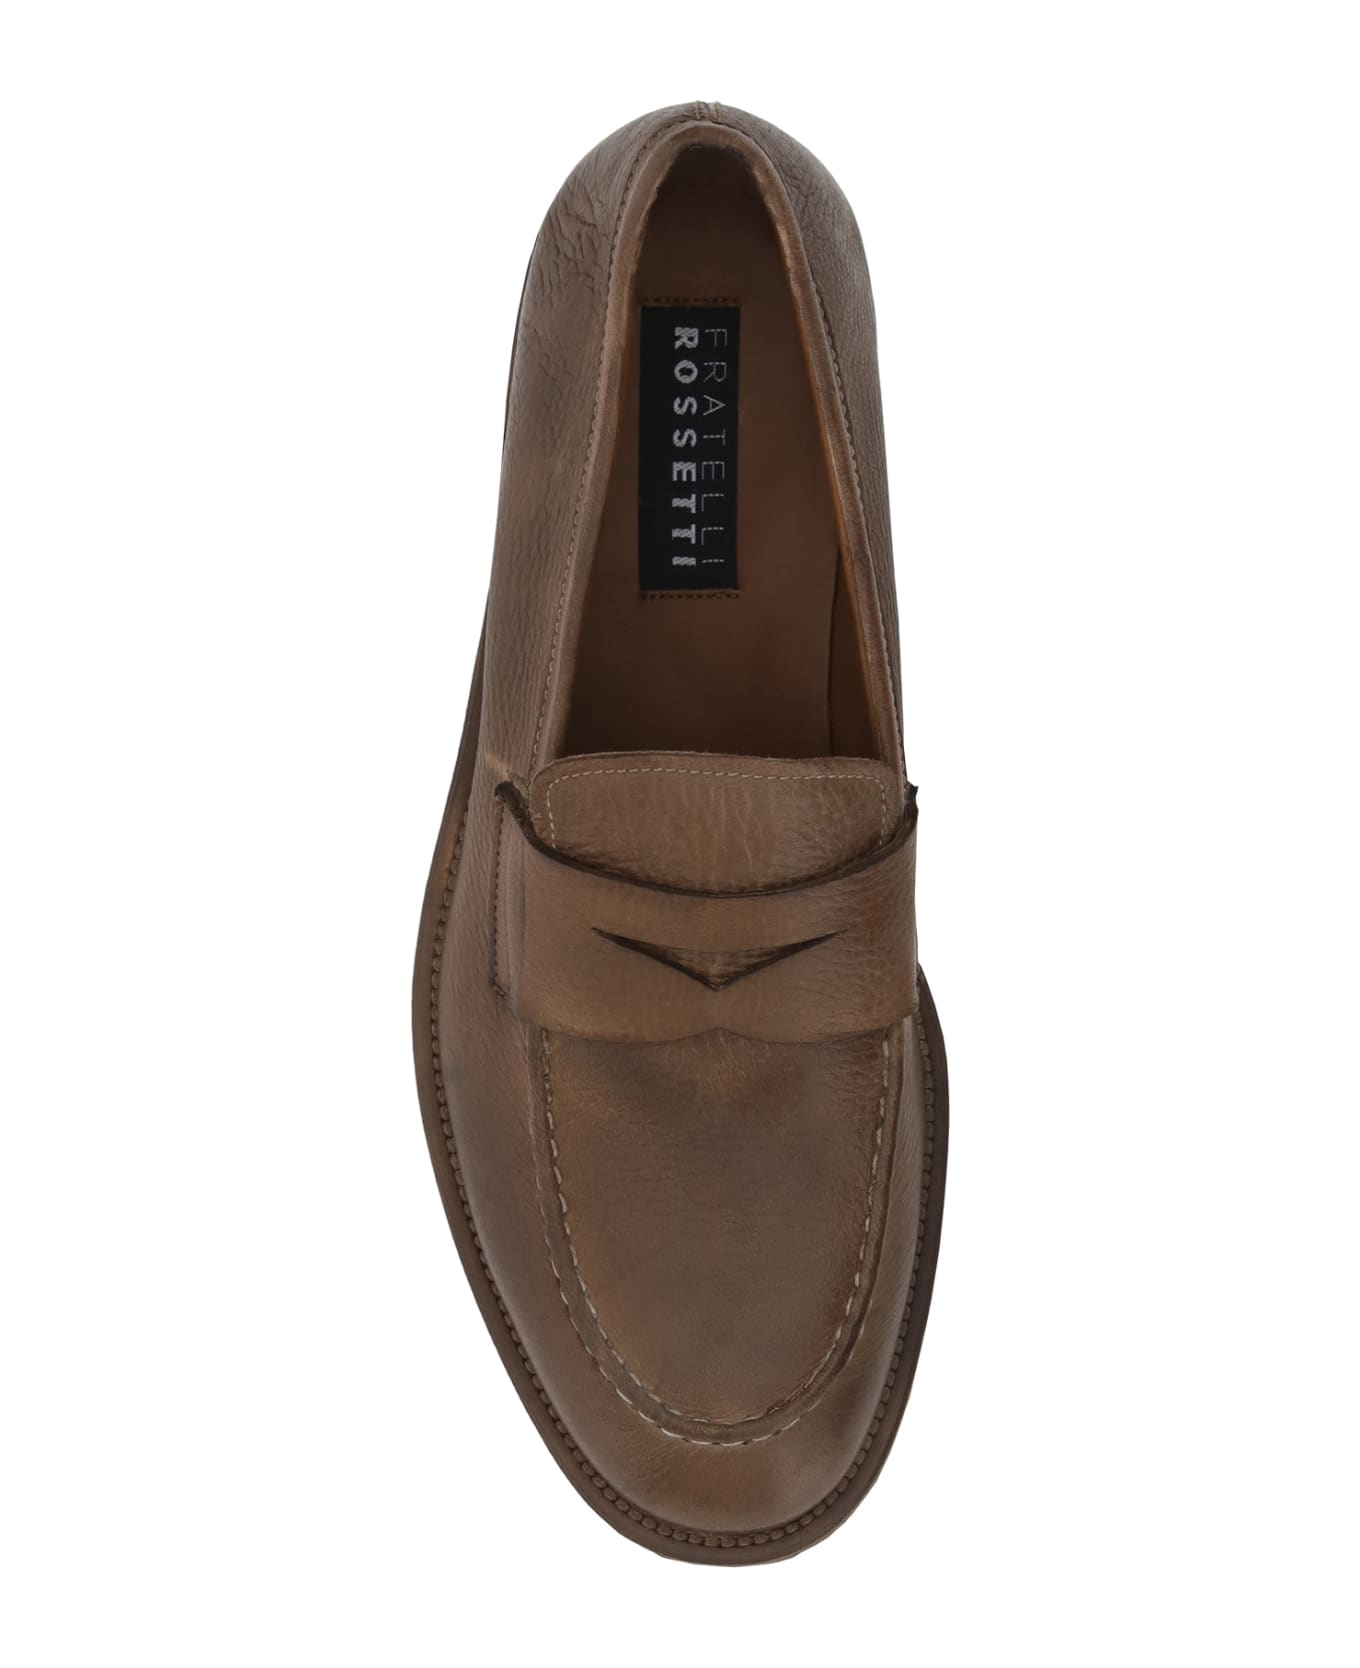 Fratelli Rossetti Loafers - Taupe